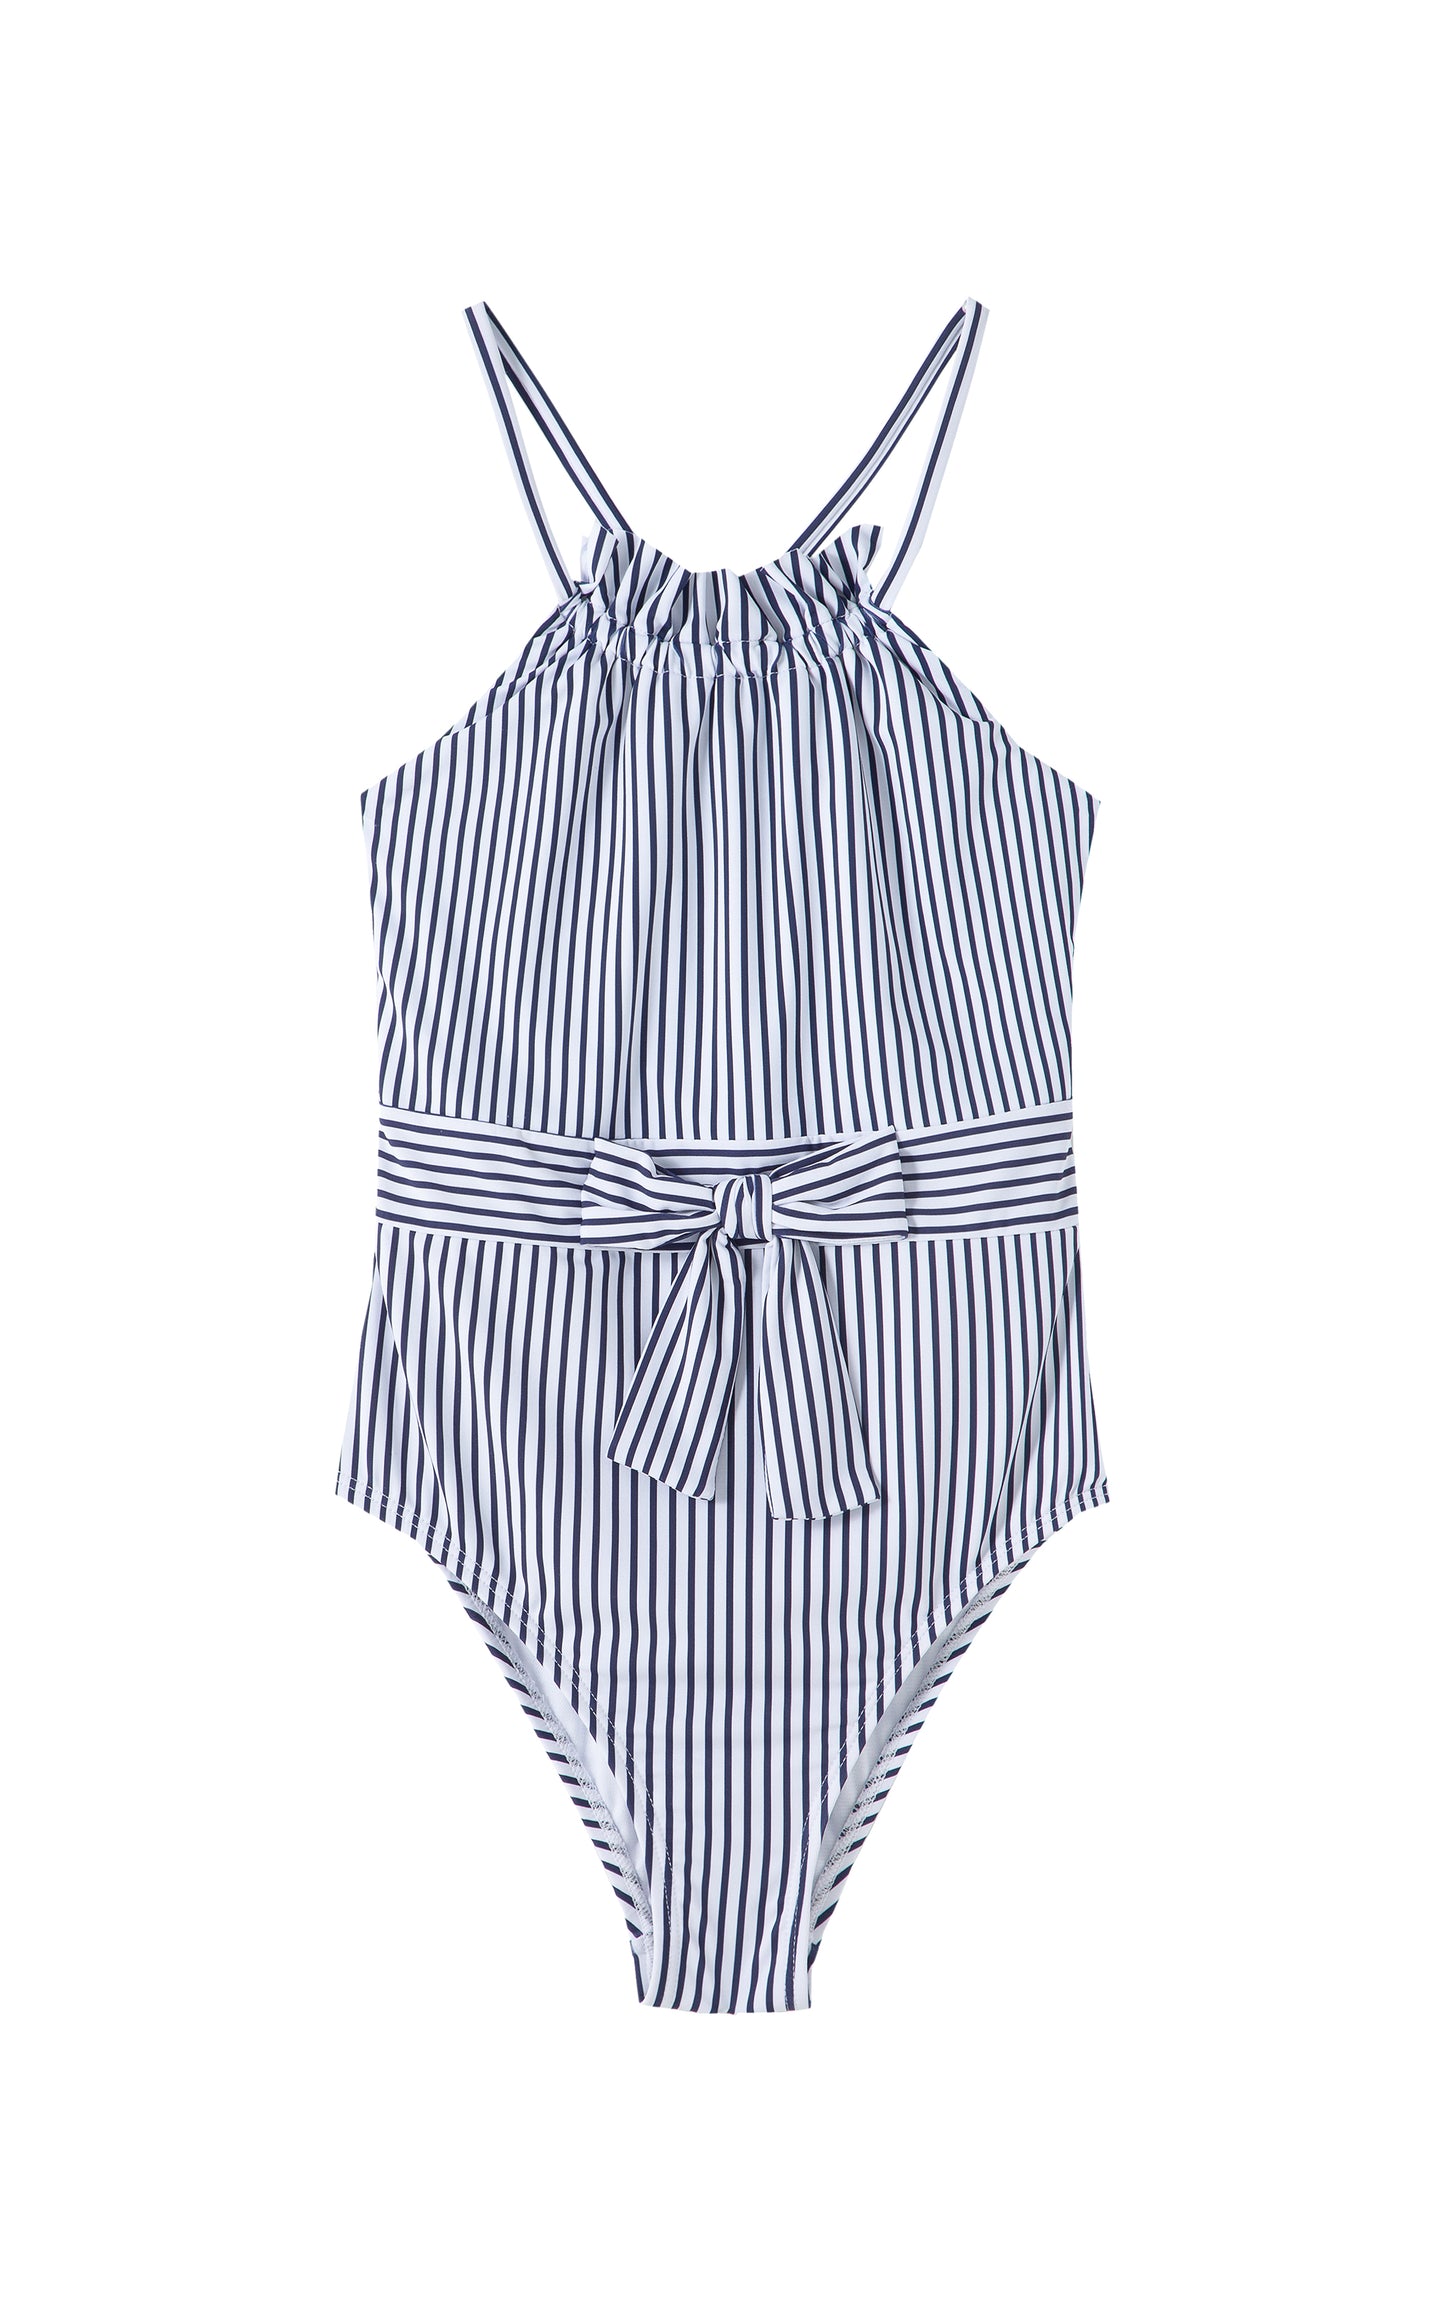 White and blue-striped swimsuit with tie at waist.